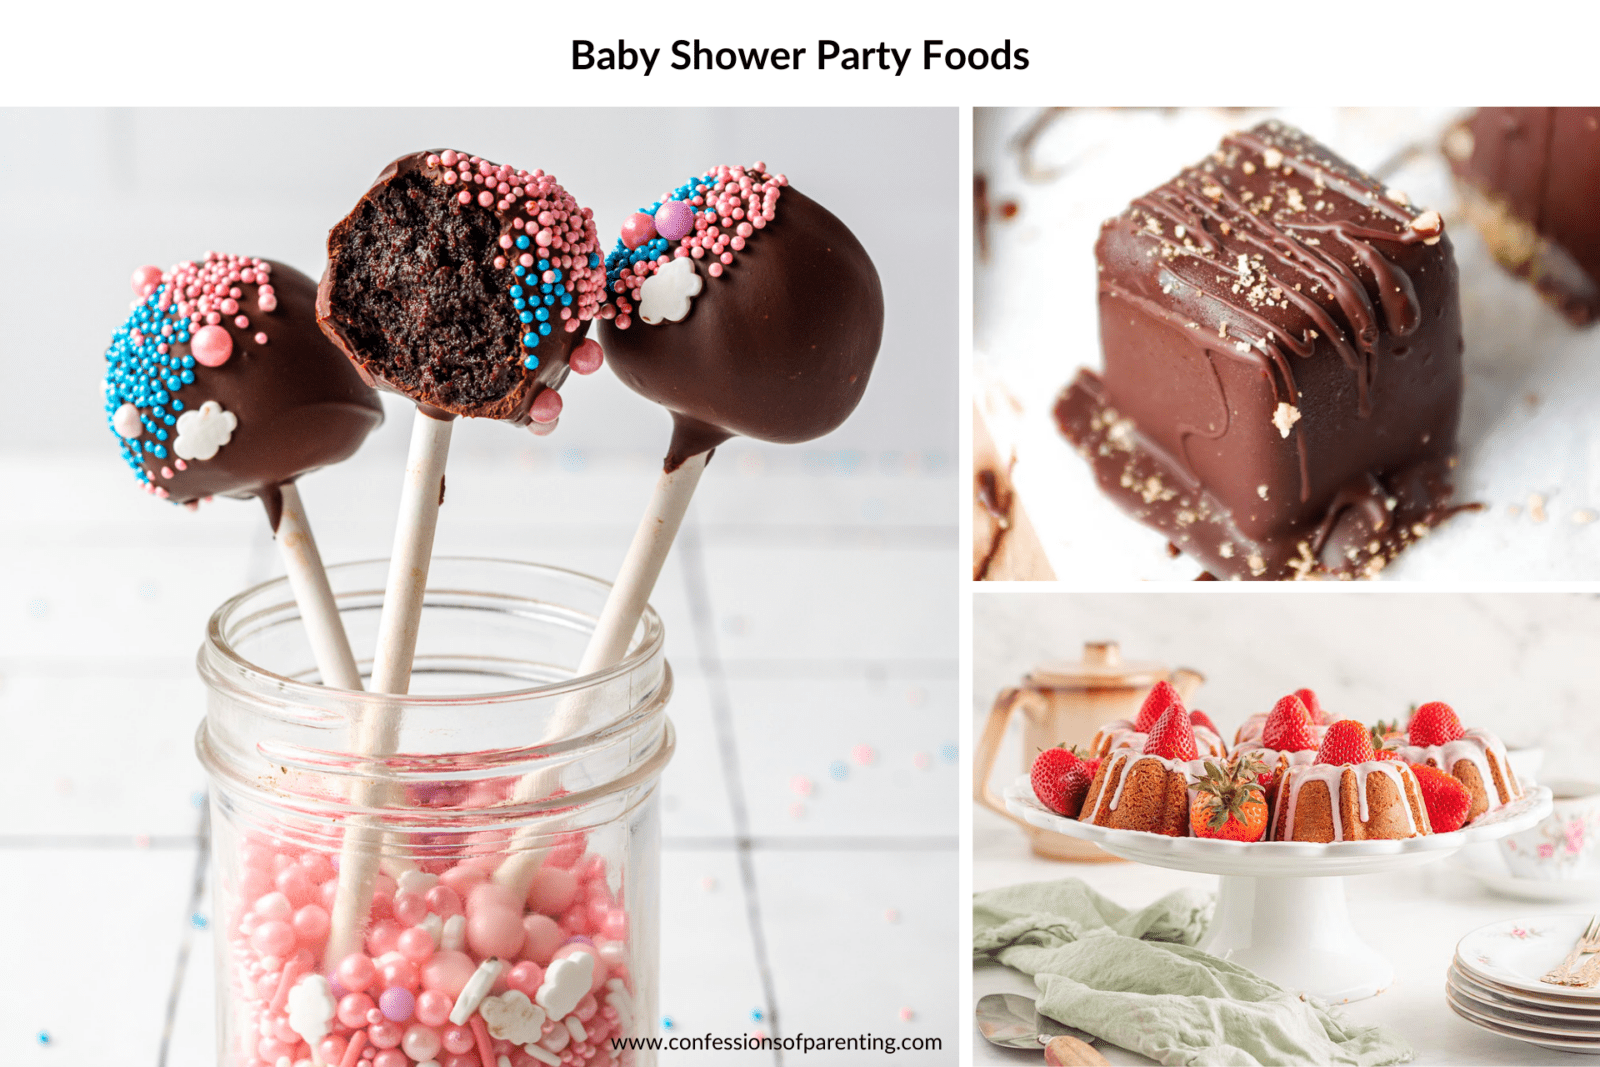 Baby Shower Party Foods